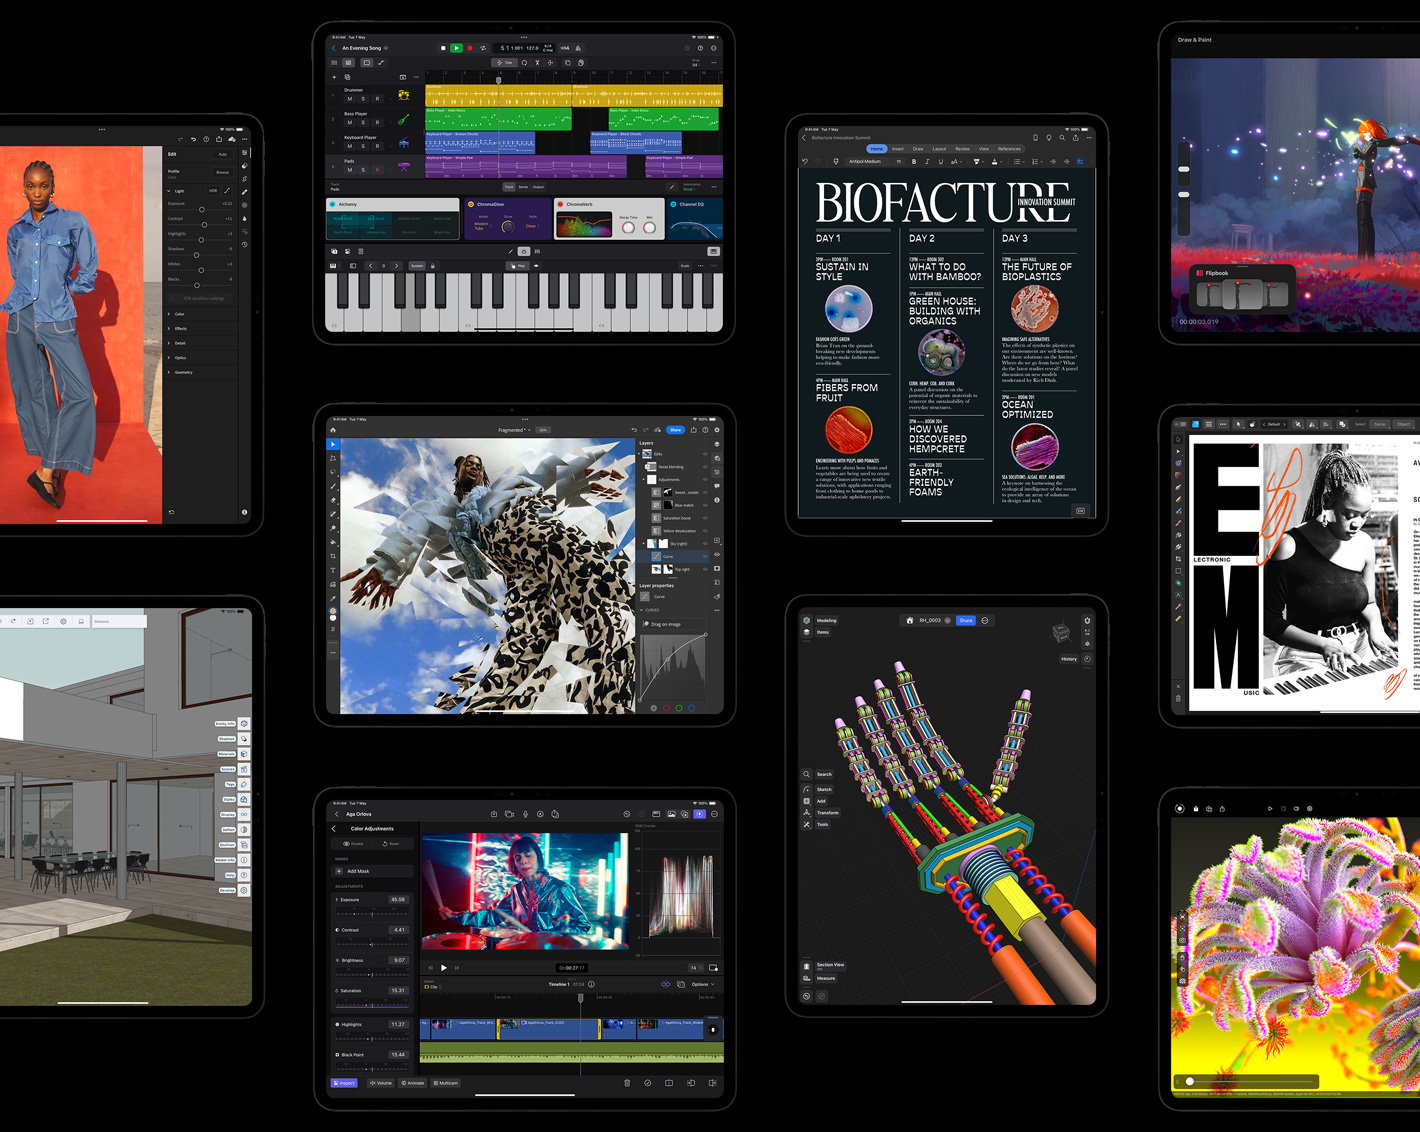 Ten iPad Pro displays showcasing different apps like - Adobe Lightroom for iPad, SketchUp, Logic Pro for iPad, Adobe Lightroom for iPad, Final Cut Pro for iPad, Microsoft Word, Shapr3D, Procreate Dreams, Affinity Designer 2 for iPad, Octane X